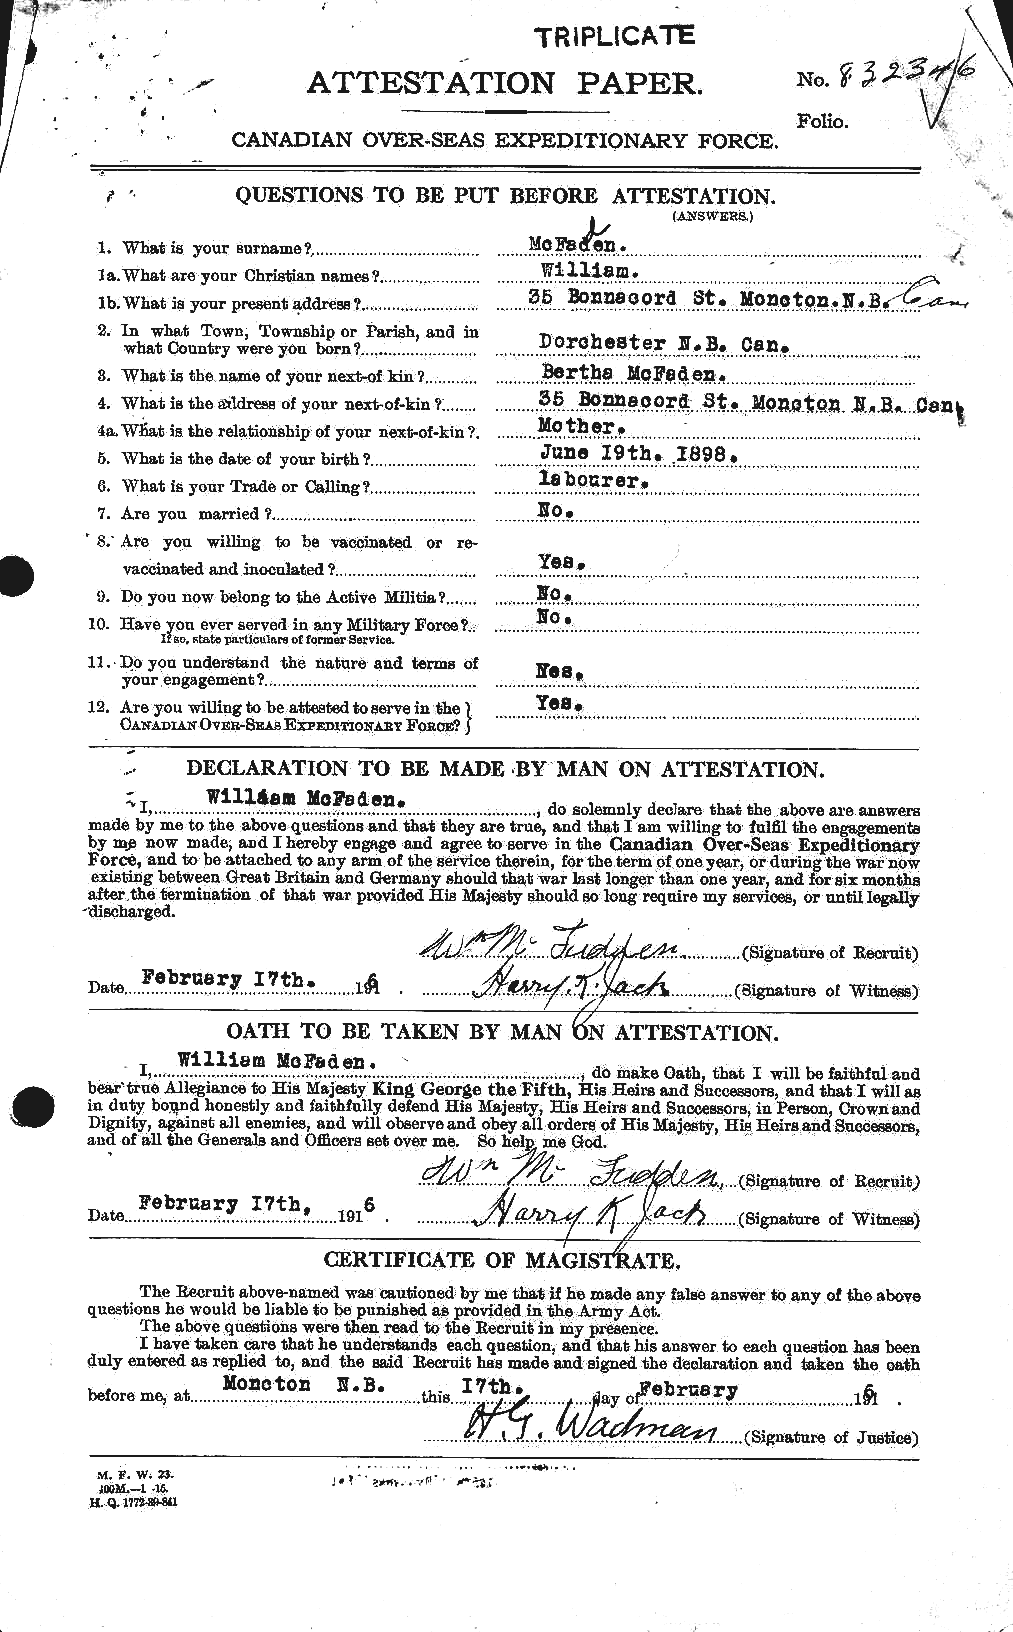 Personnel Records of the First World War - CEF 521117a